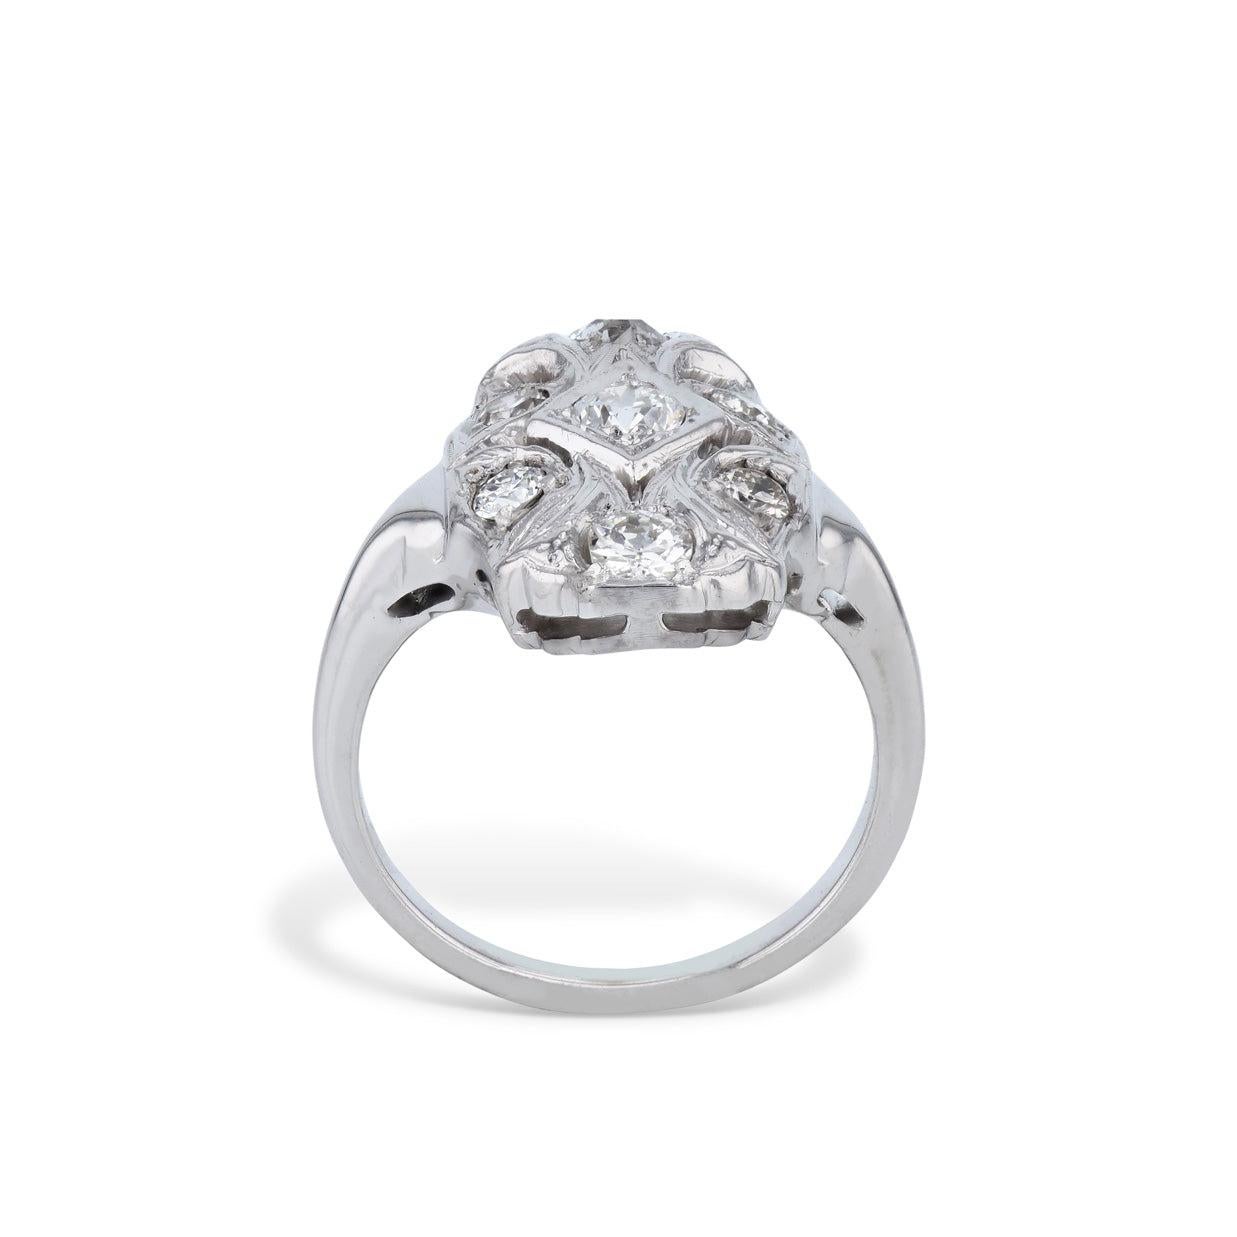 A stunningly exquisite diamond and white gold estate panel ring, crafted with 14 kt. white gold and featuring 7 glittering Old European Cut Diamonds. Delightfully unique, this ring adds an enchanting touch of vintage glamour to your